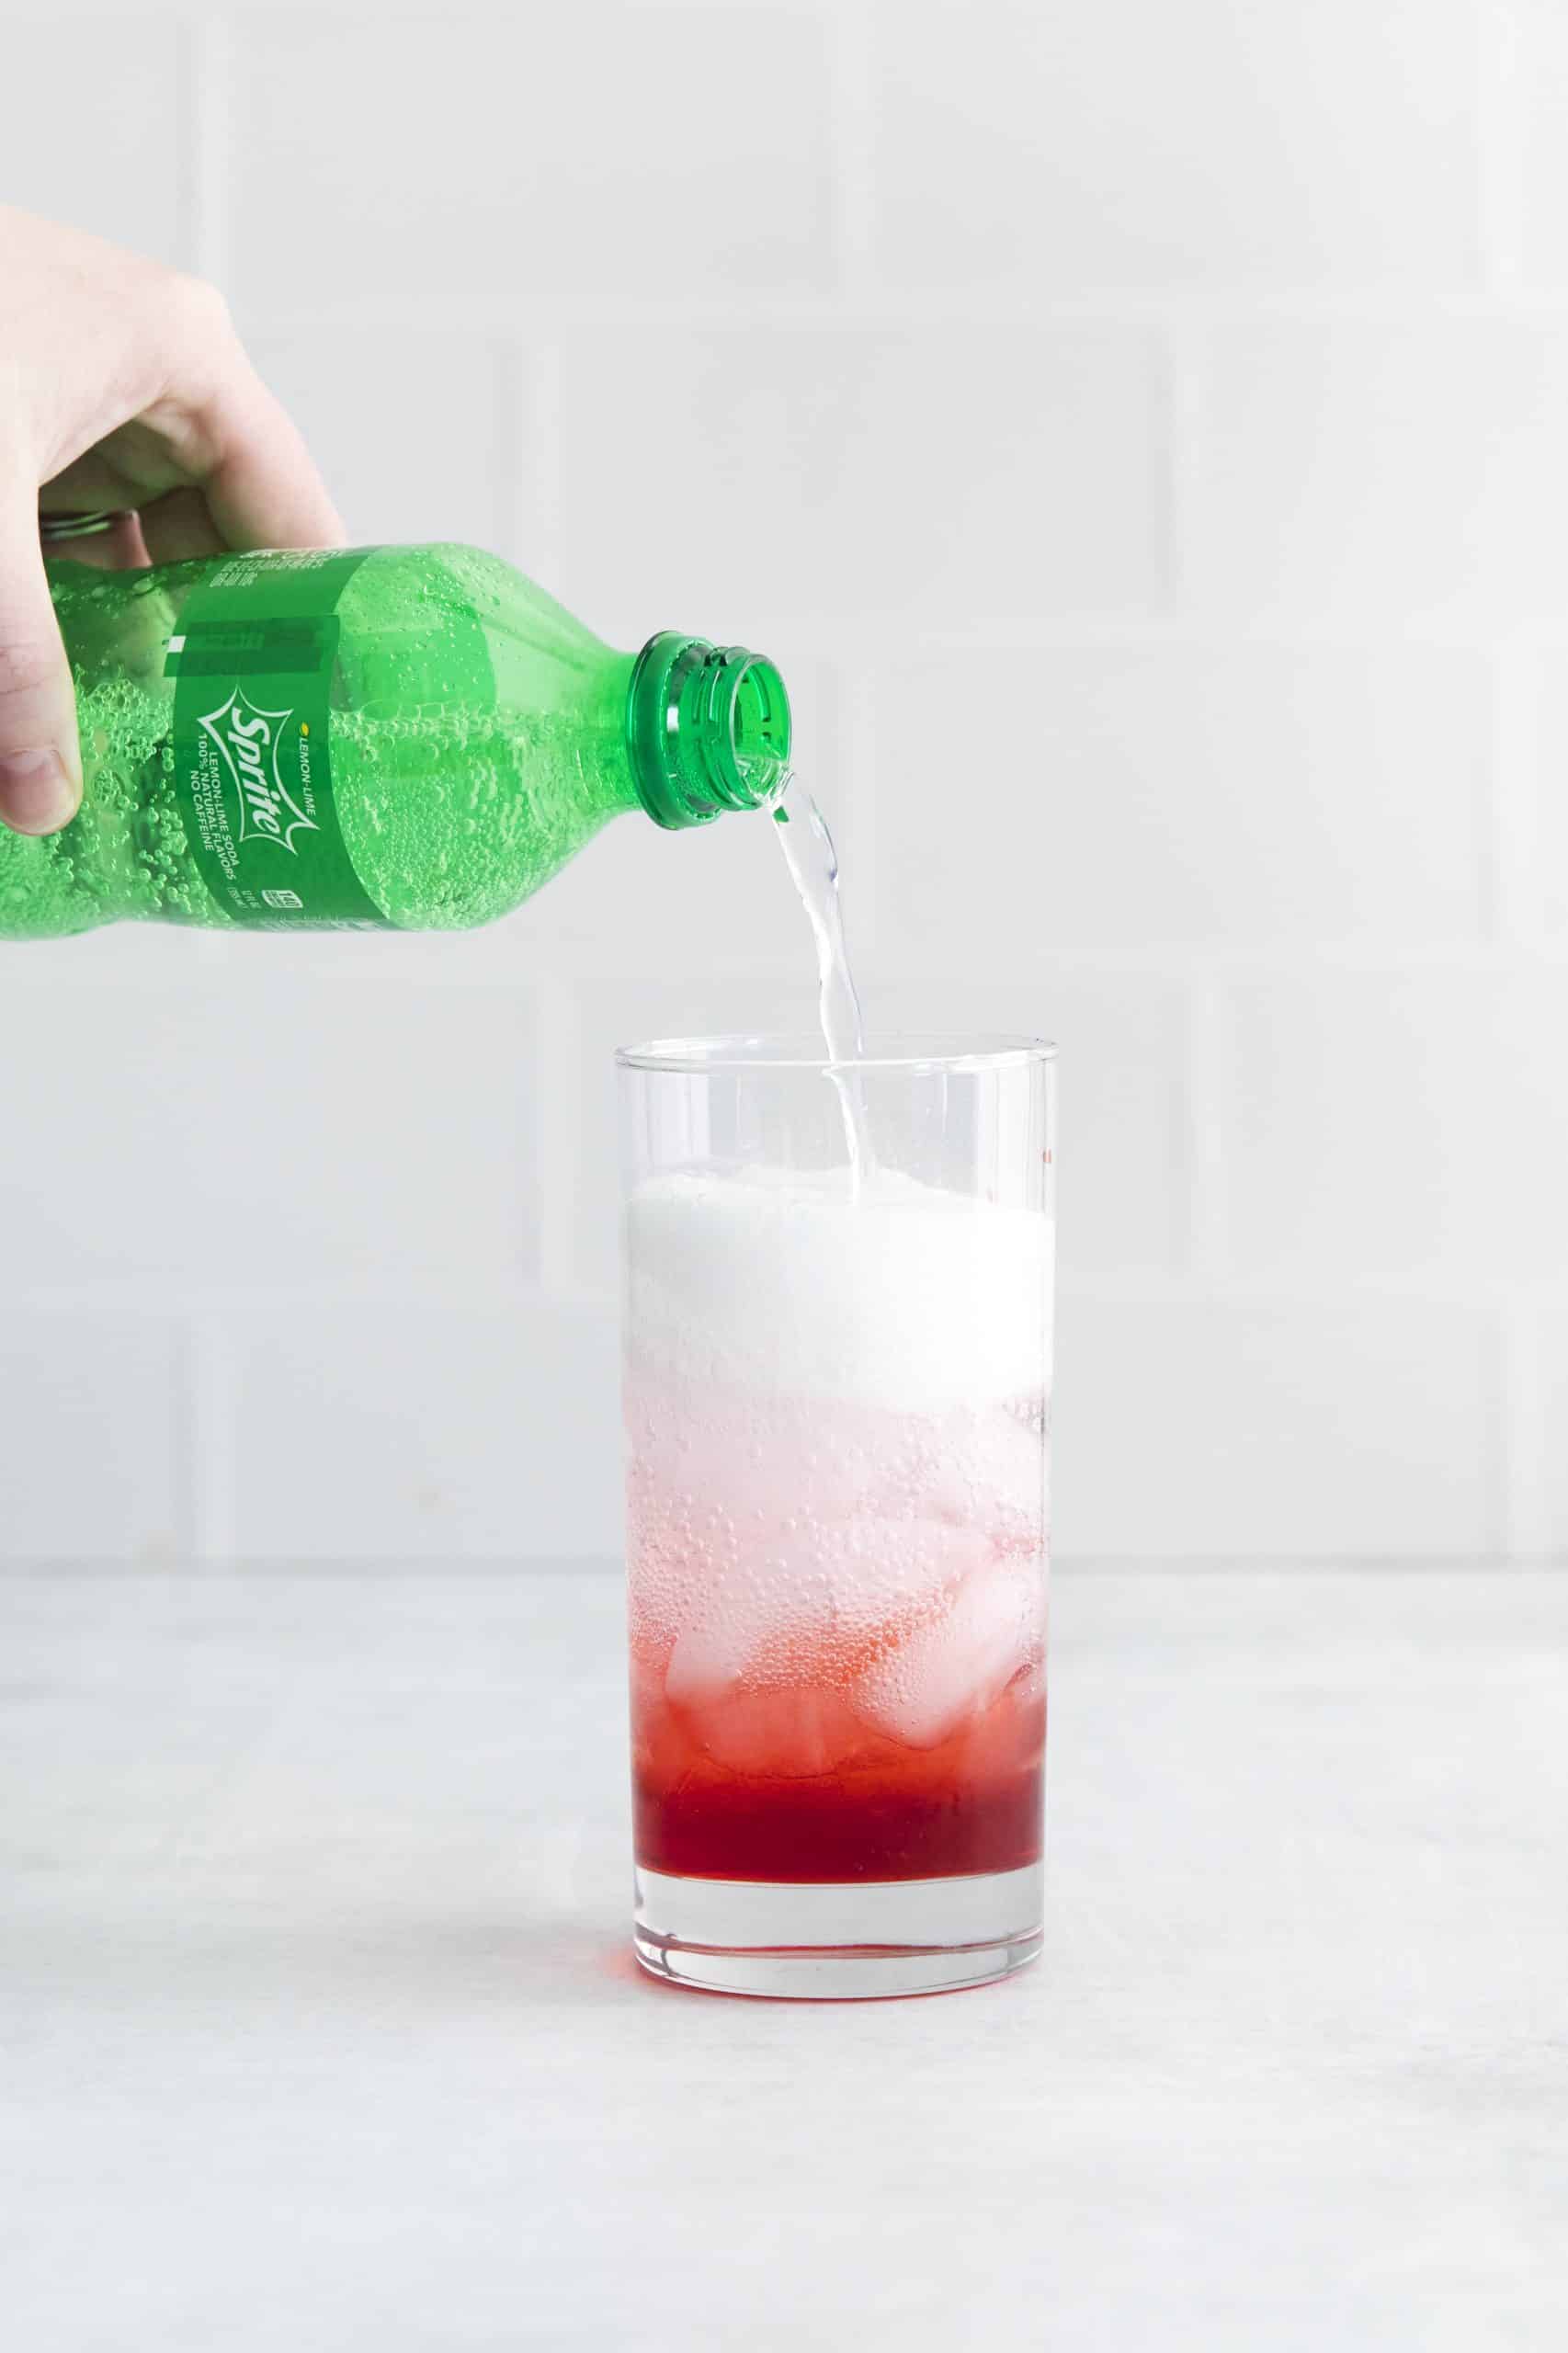 Tall glass with red liquid and sprite being poured into it